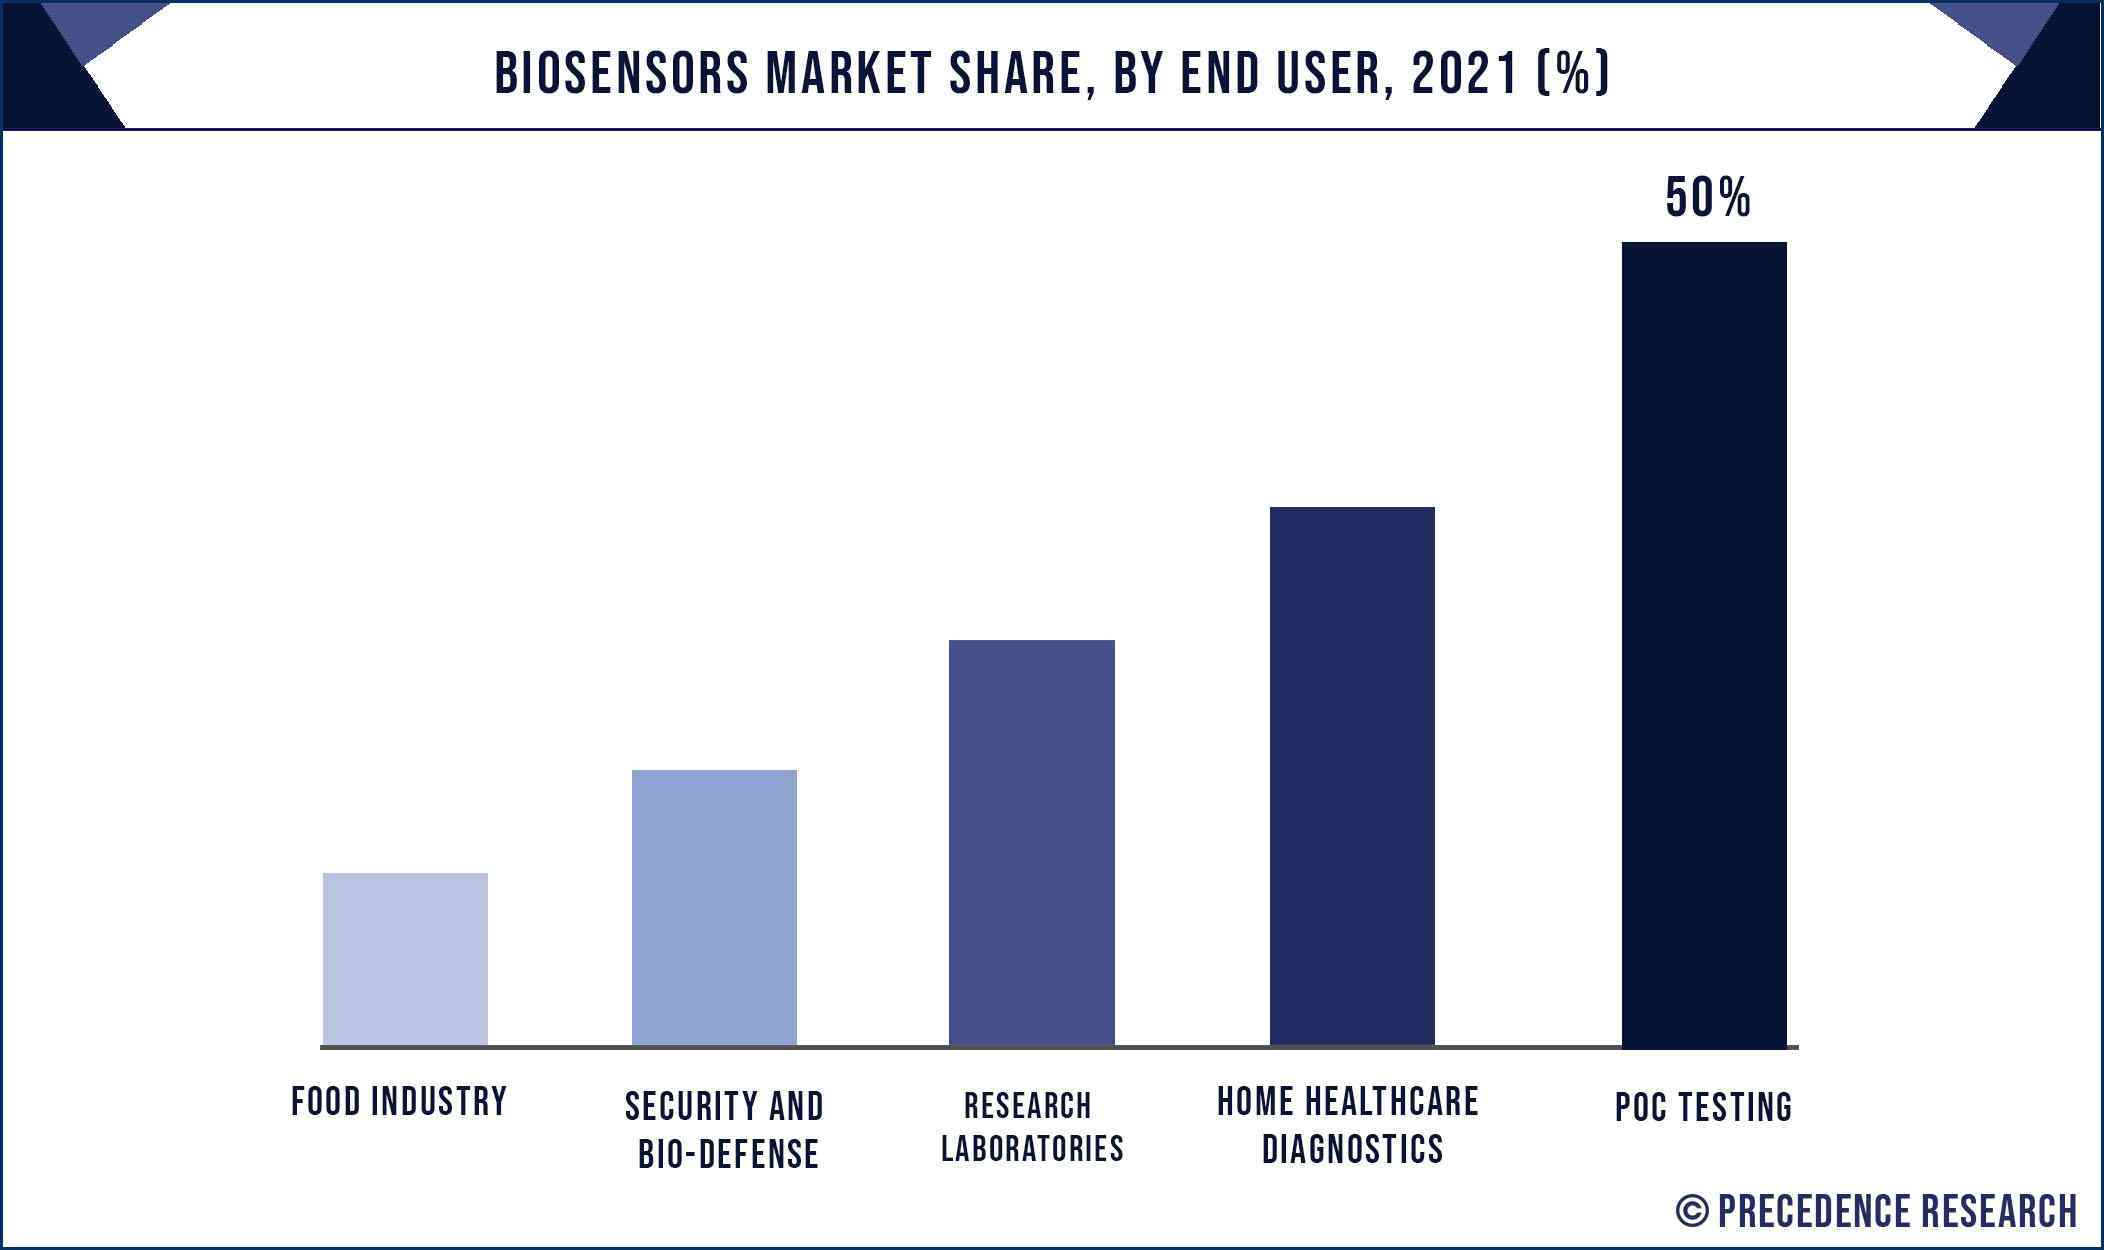 Biosensors Market Share, By End User, 2021 (%)